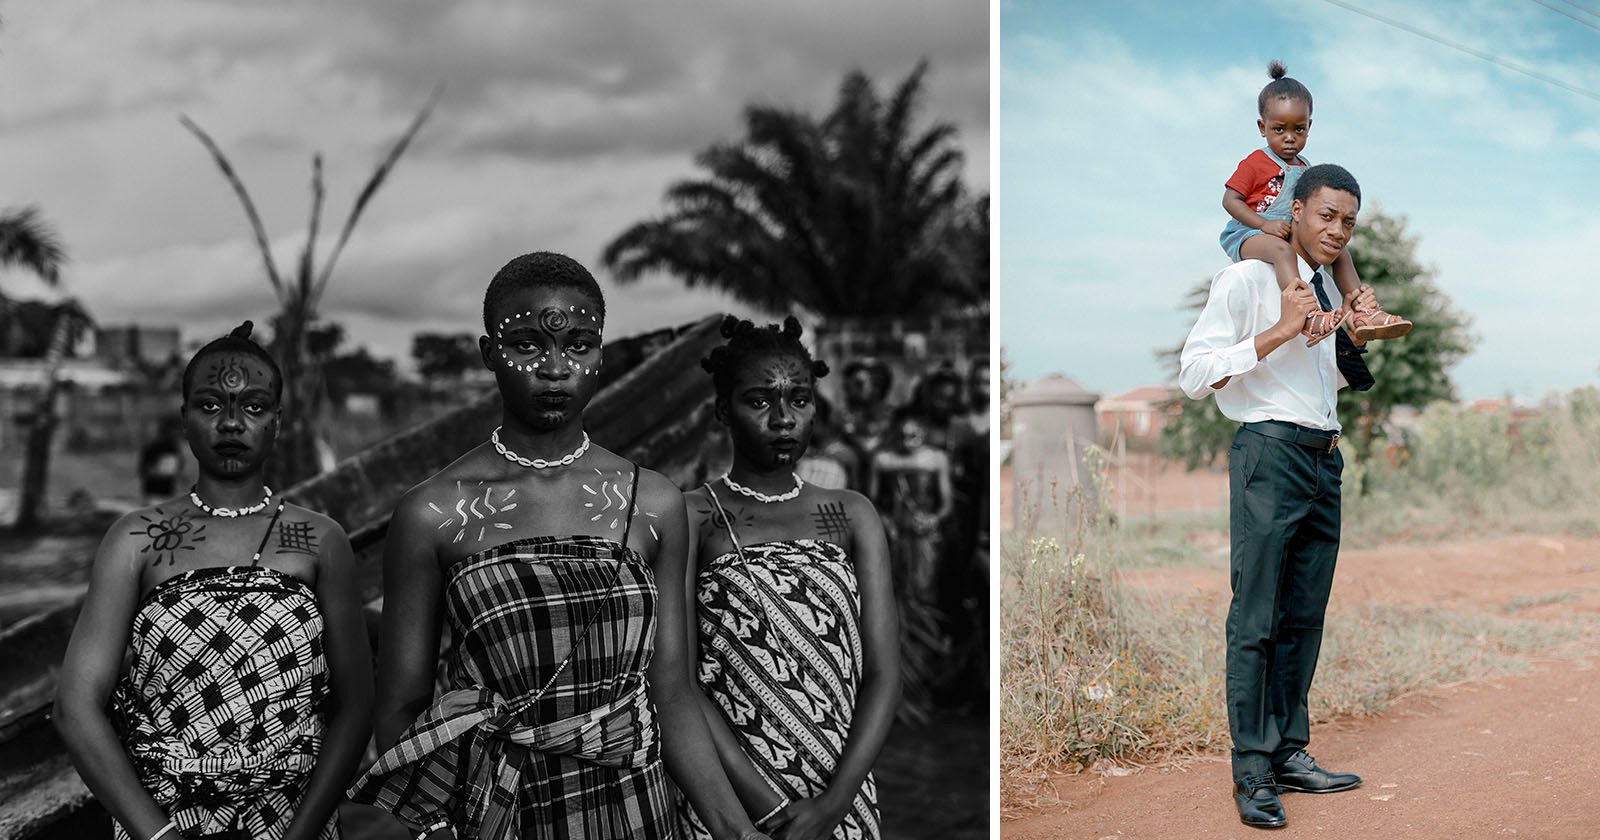 Amazing Images of African Diaspora on Display in CAP Prize Shortlist